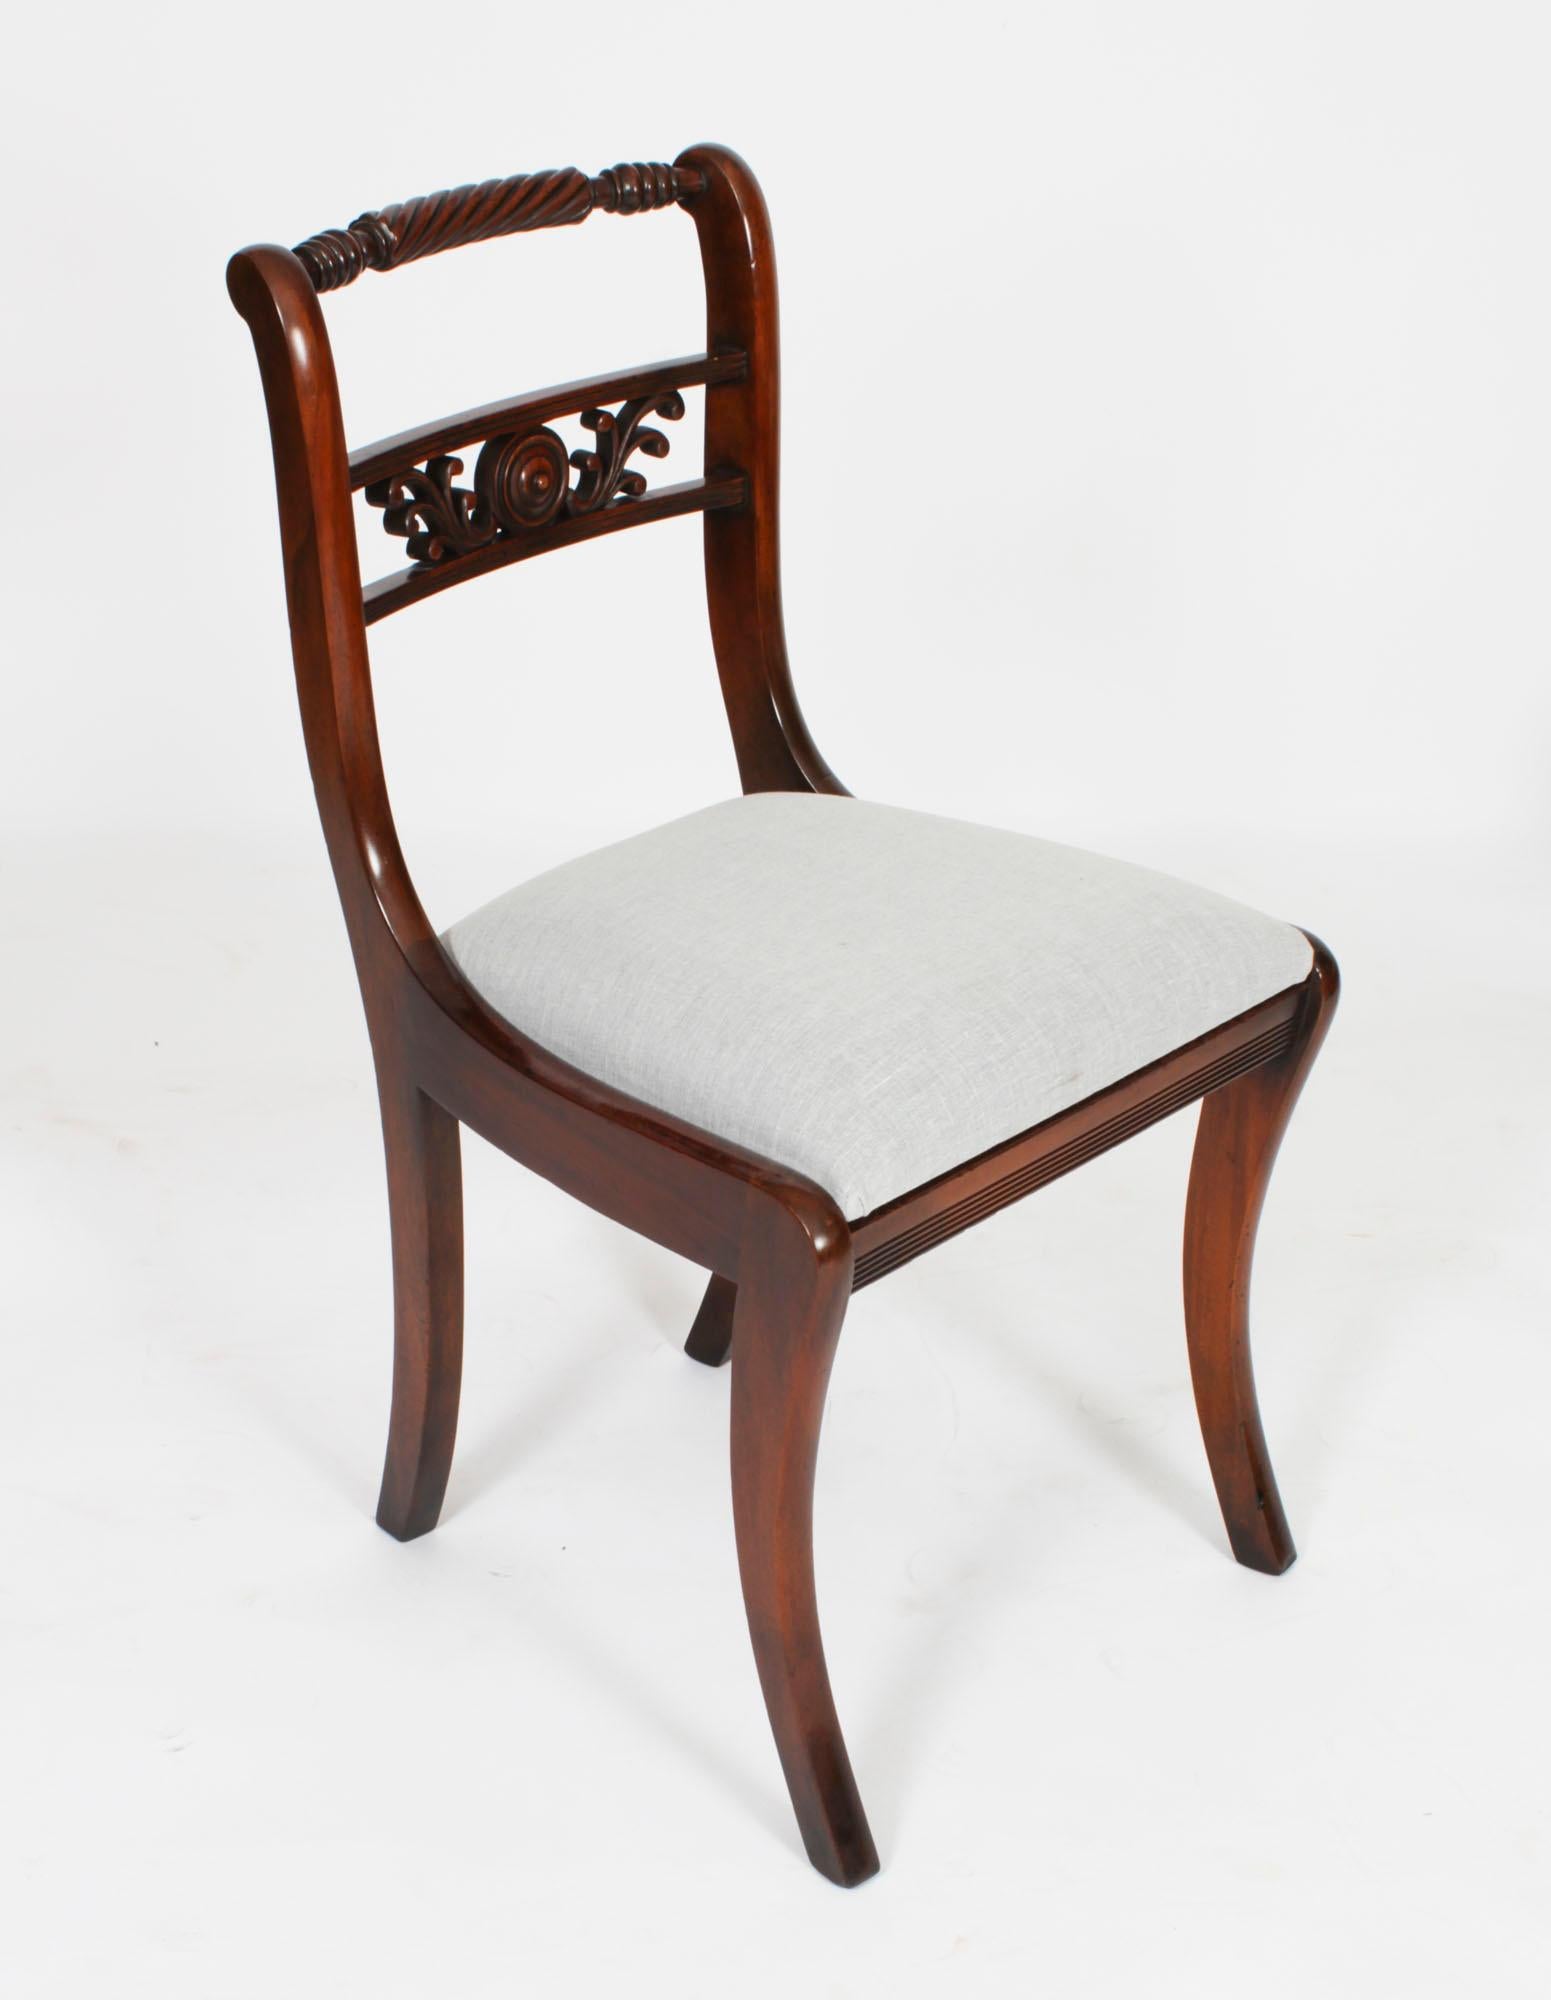 An absolutely fantastic Vintage set of twelve Regency Revival dining chairs dating from the second half of the 20th century.

These chairs have been masterfully crafted in beautiful solid flame mahogany throughout and the finish and attention to